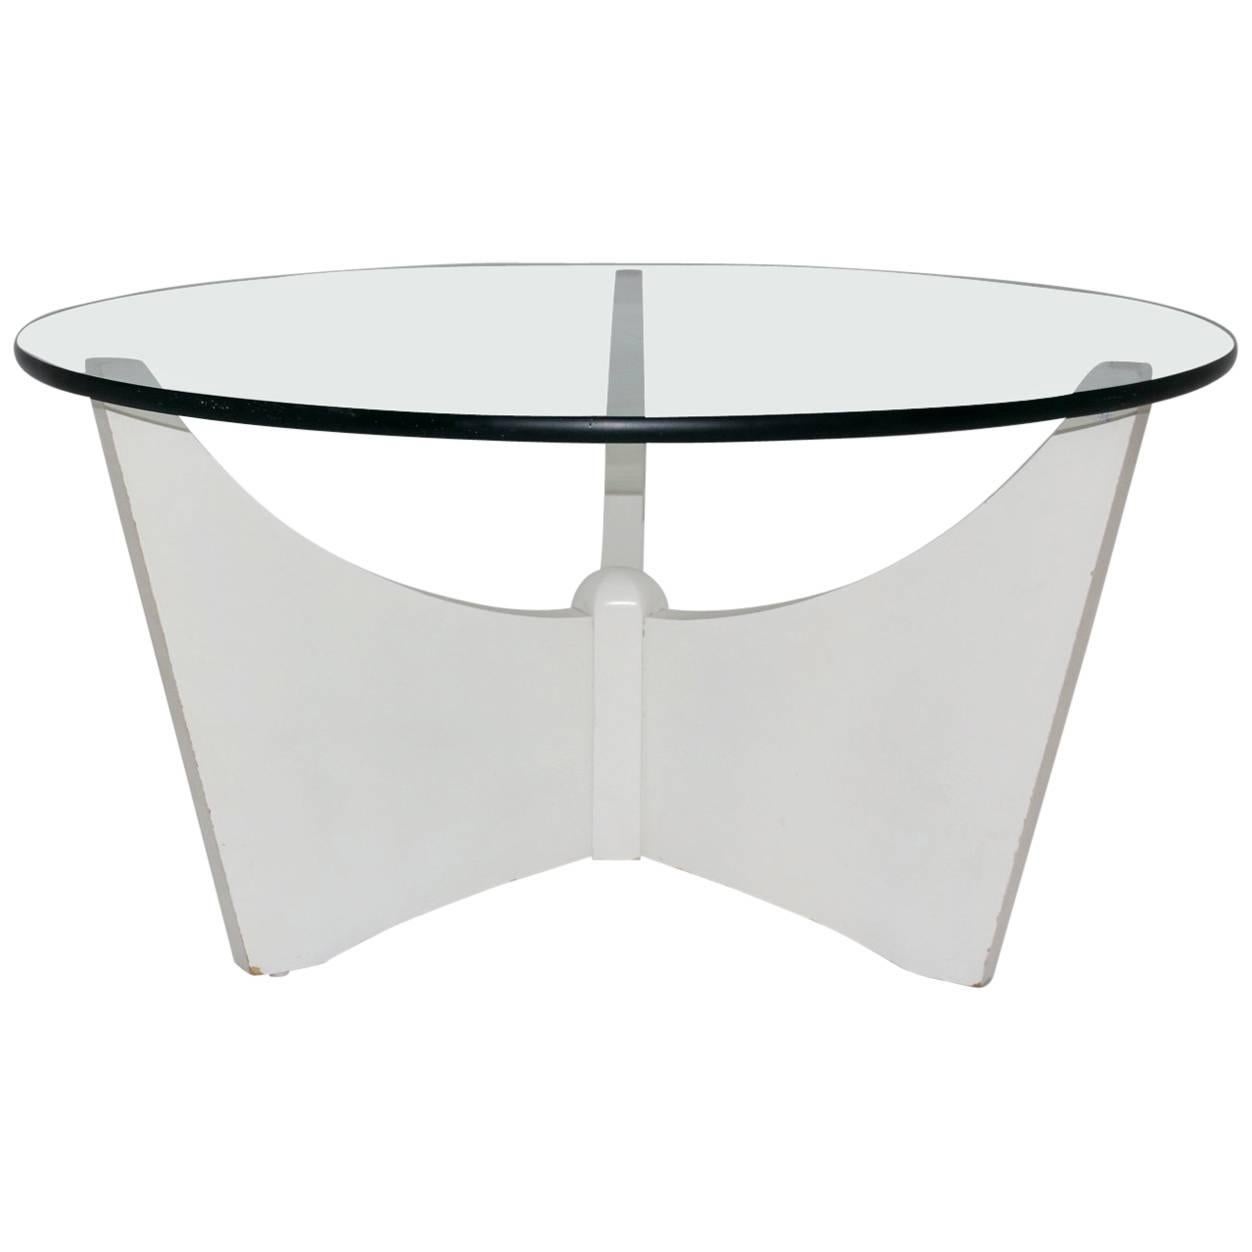 Space Age Vintage White Coffee Table with Glass Top, circa 1970 For Sale